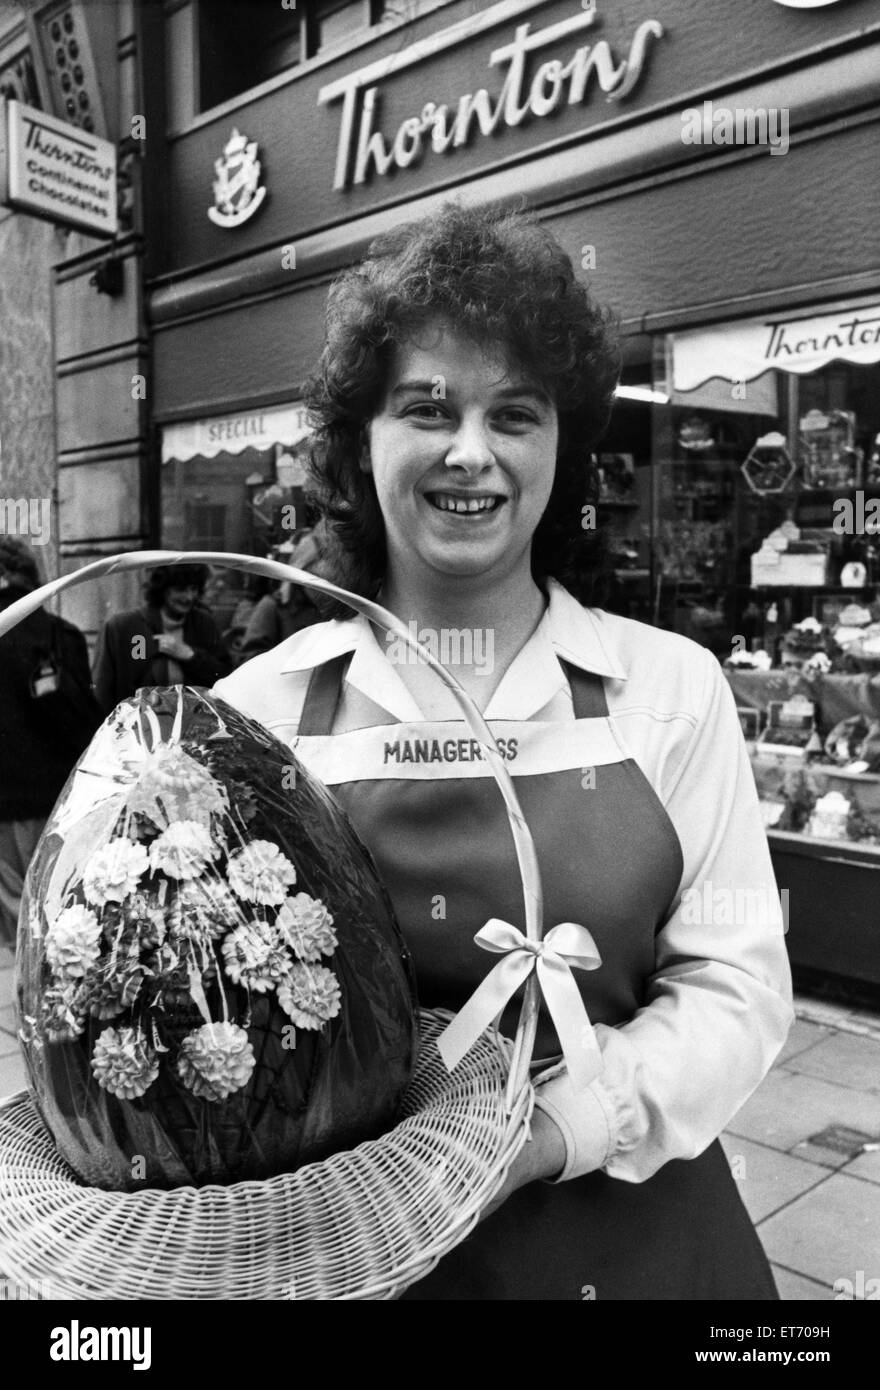 Eggstravagance? Rosalyn Beck, Thorntons Manageress, gets her hands - but not her mouth - on a 32 pound easter egg, 9th April 1987. Stock Photo